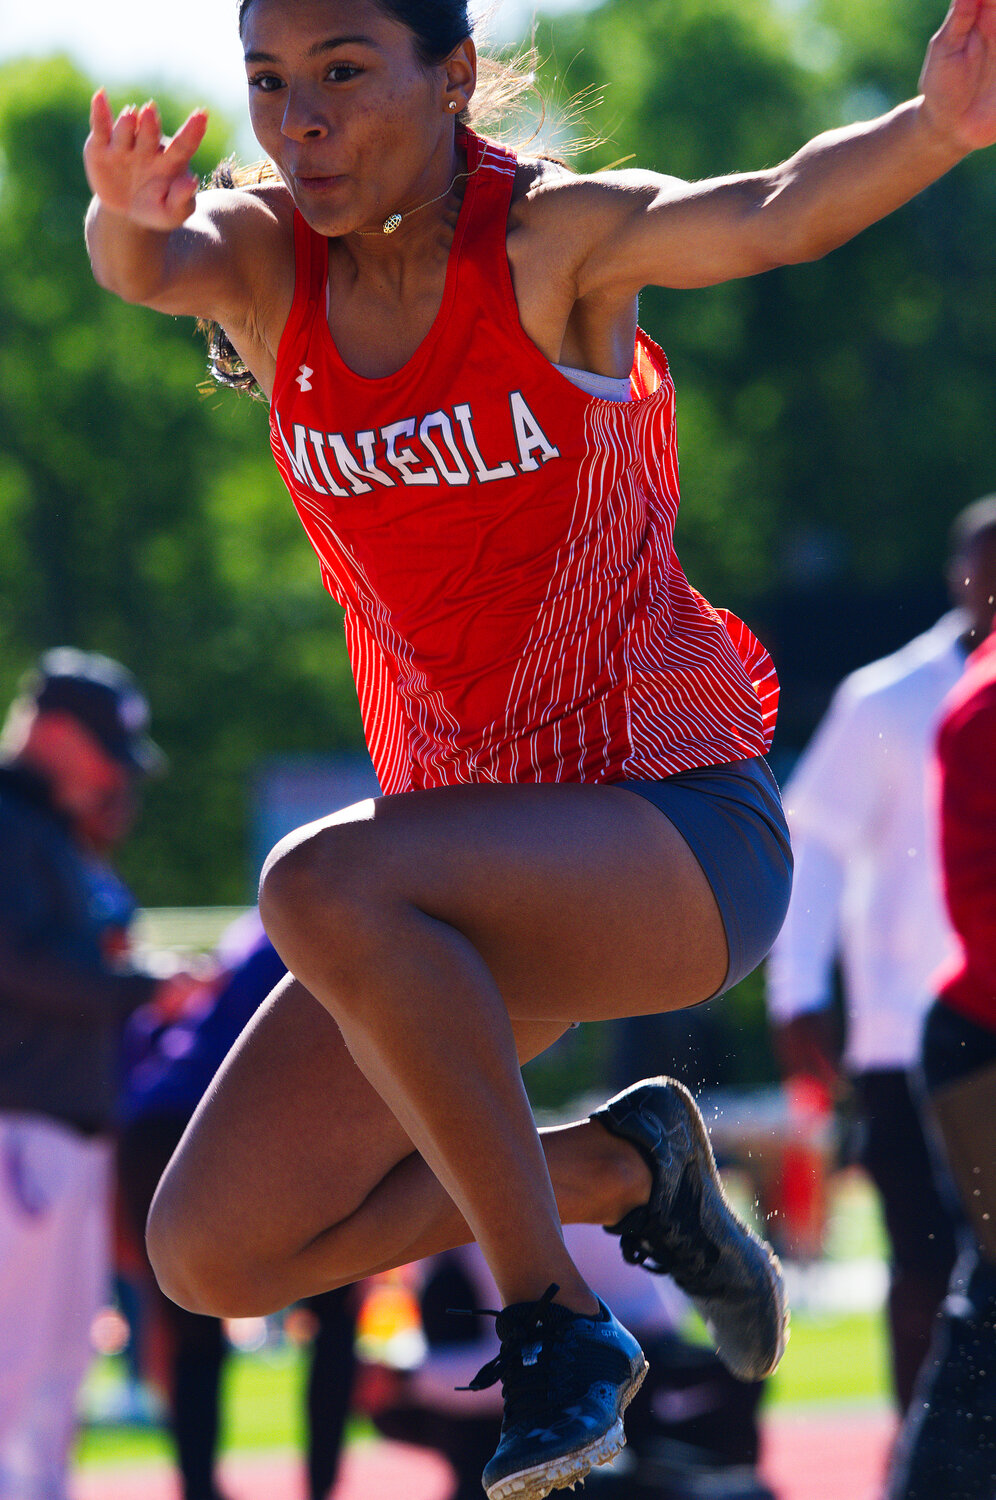 Stephanie Rojas bounded 31'8.5" for sixth place in the triple jump. [see more speed and strength on display]